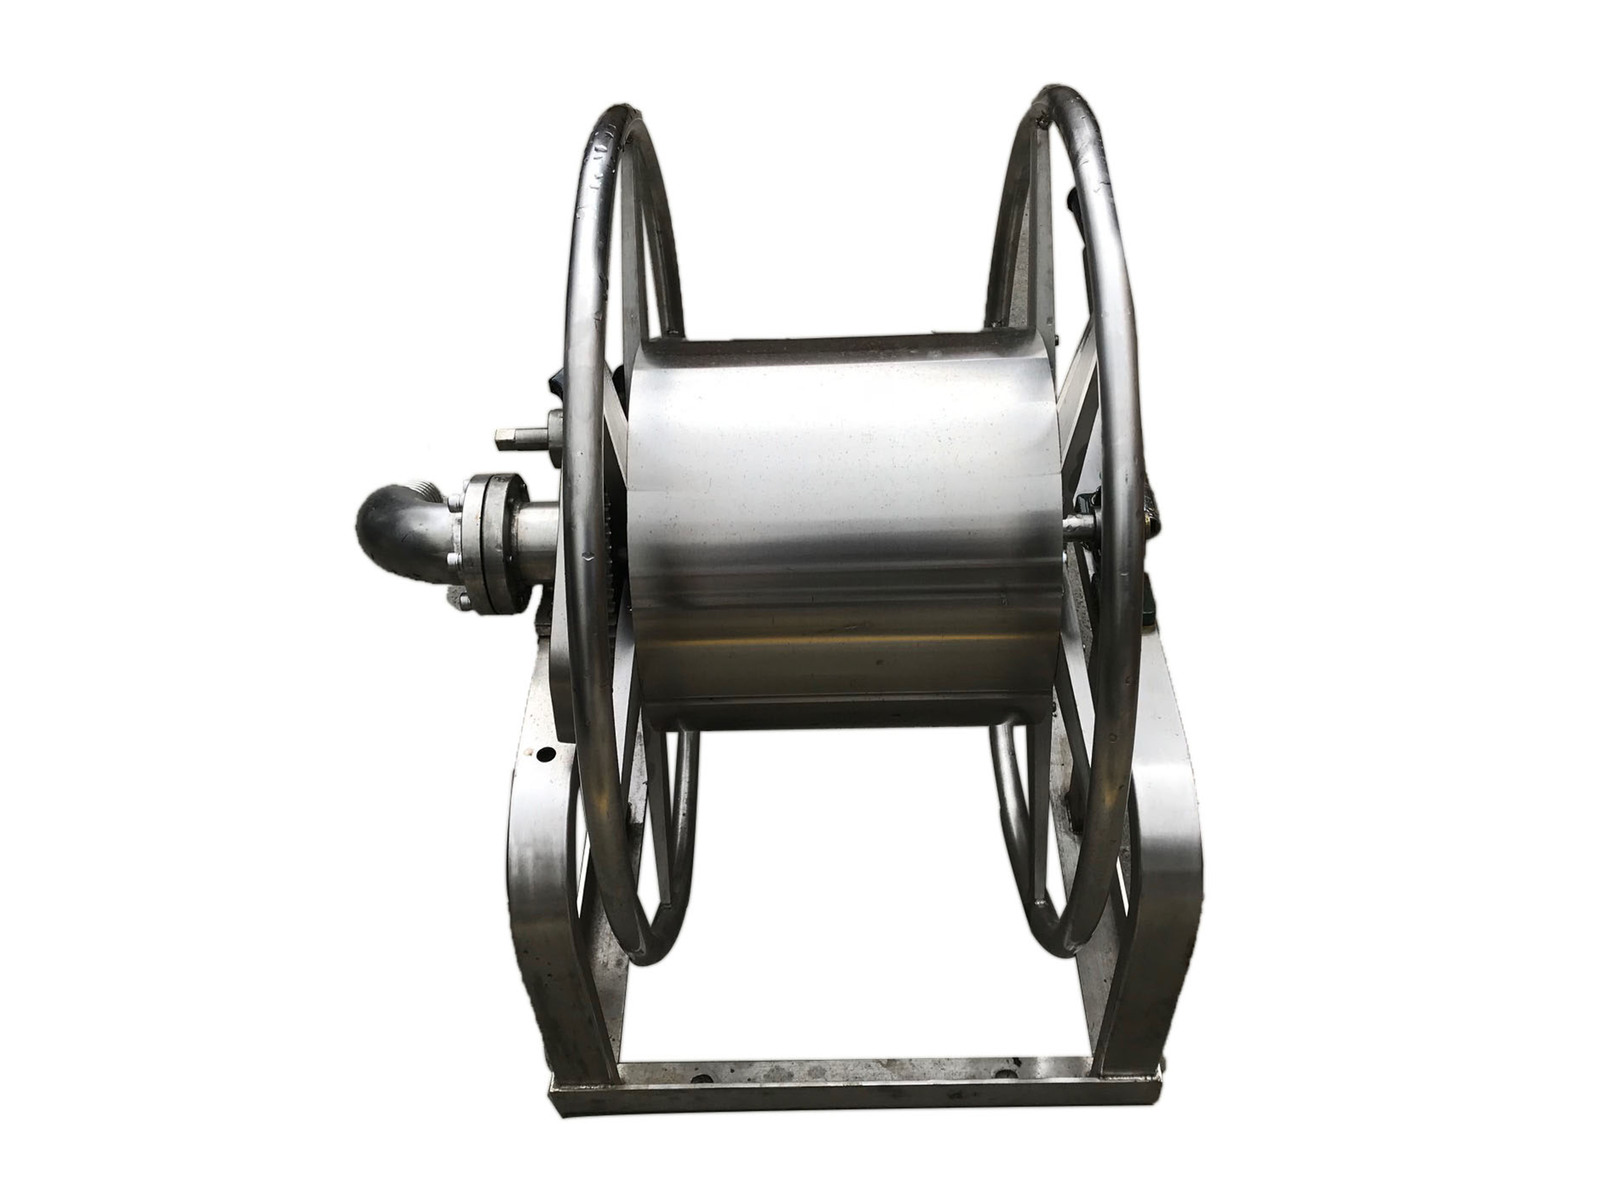 Small WT Stainless steel hose reel 1.5inch hose